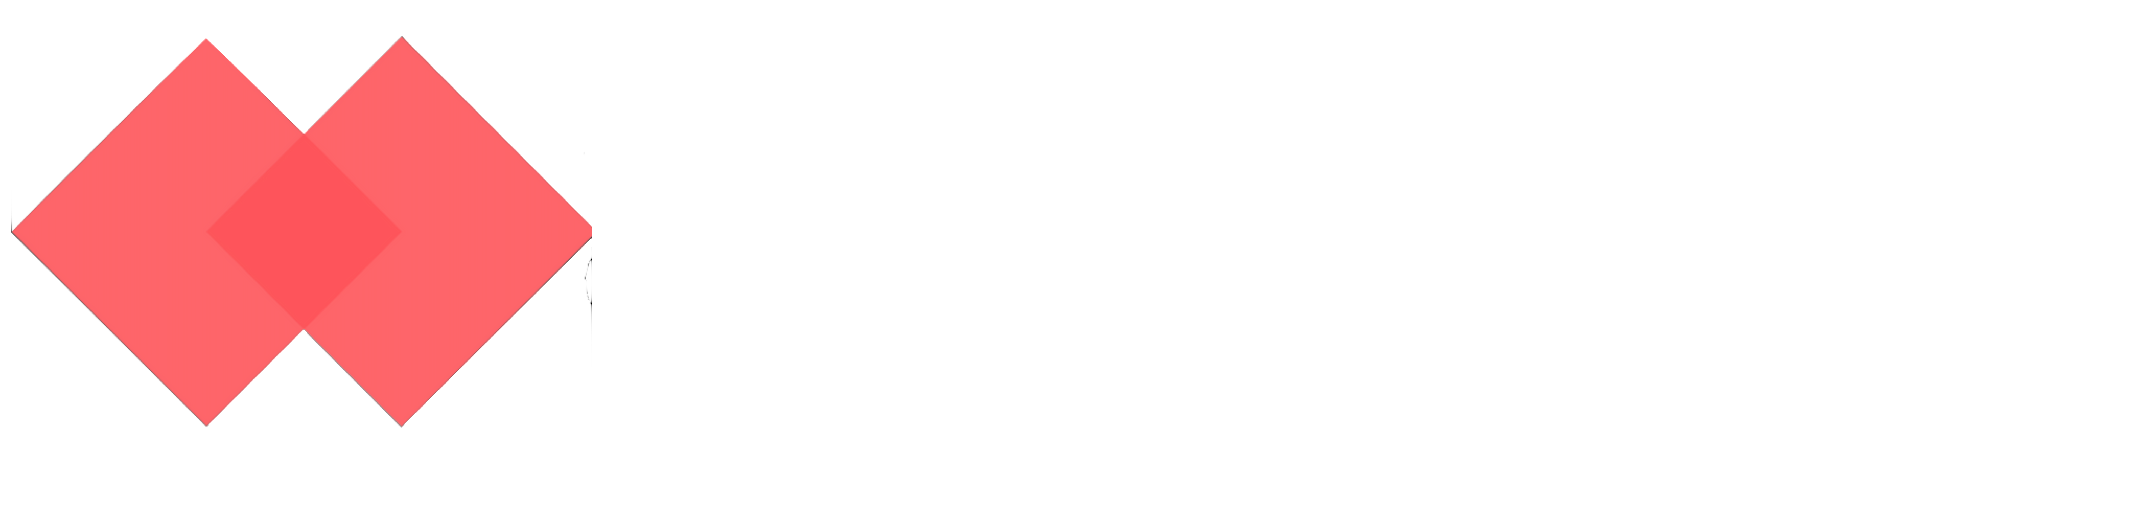 Cabinets-Counter-tops-3